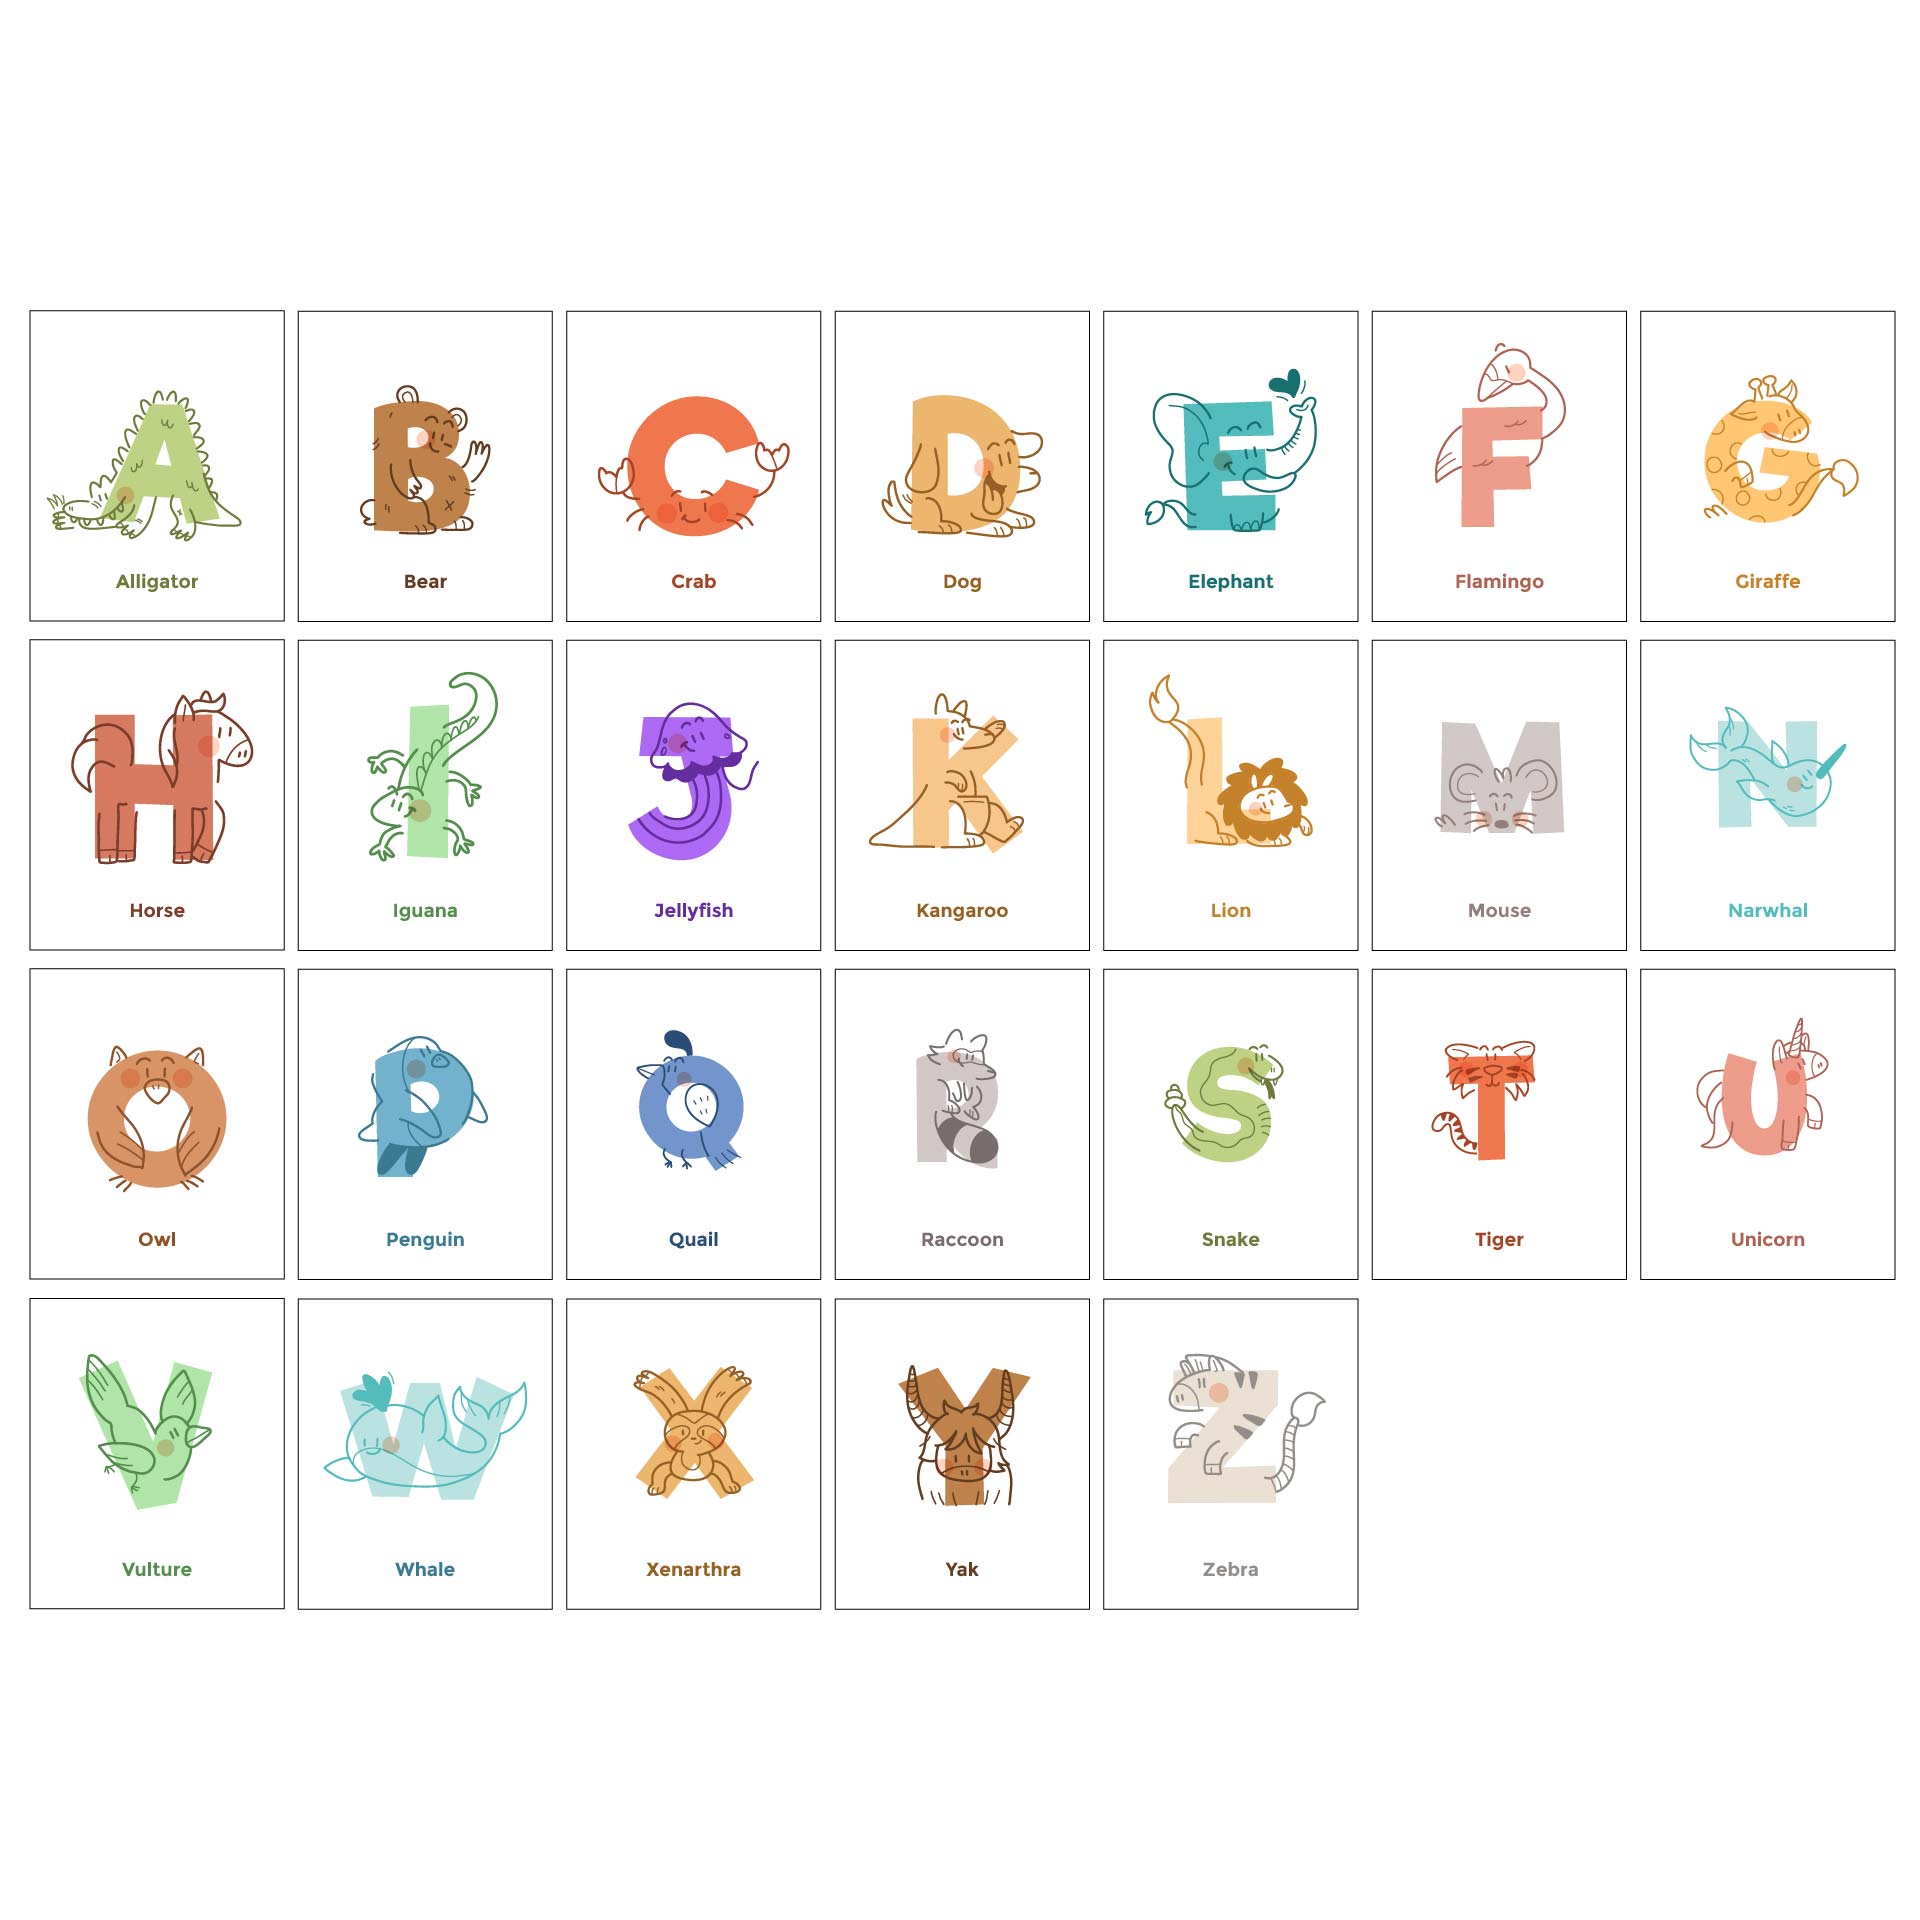 7-best-images-of-free-printable-alphabet-flashcards-free-printable-alphabet-flash-cards-free